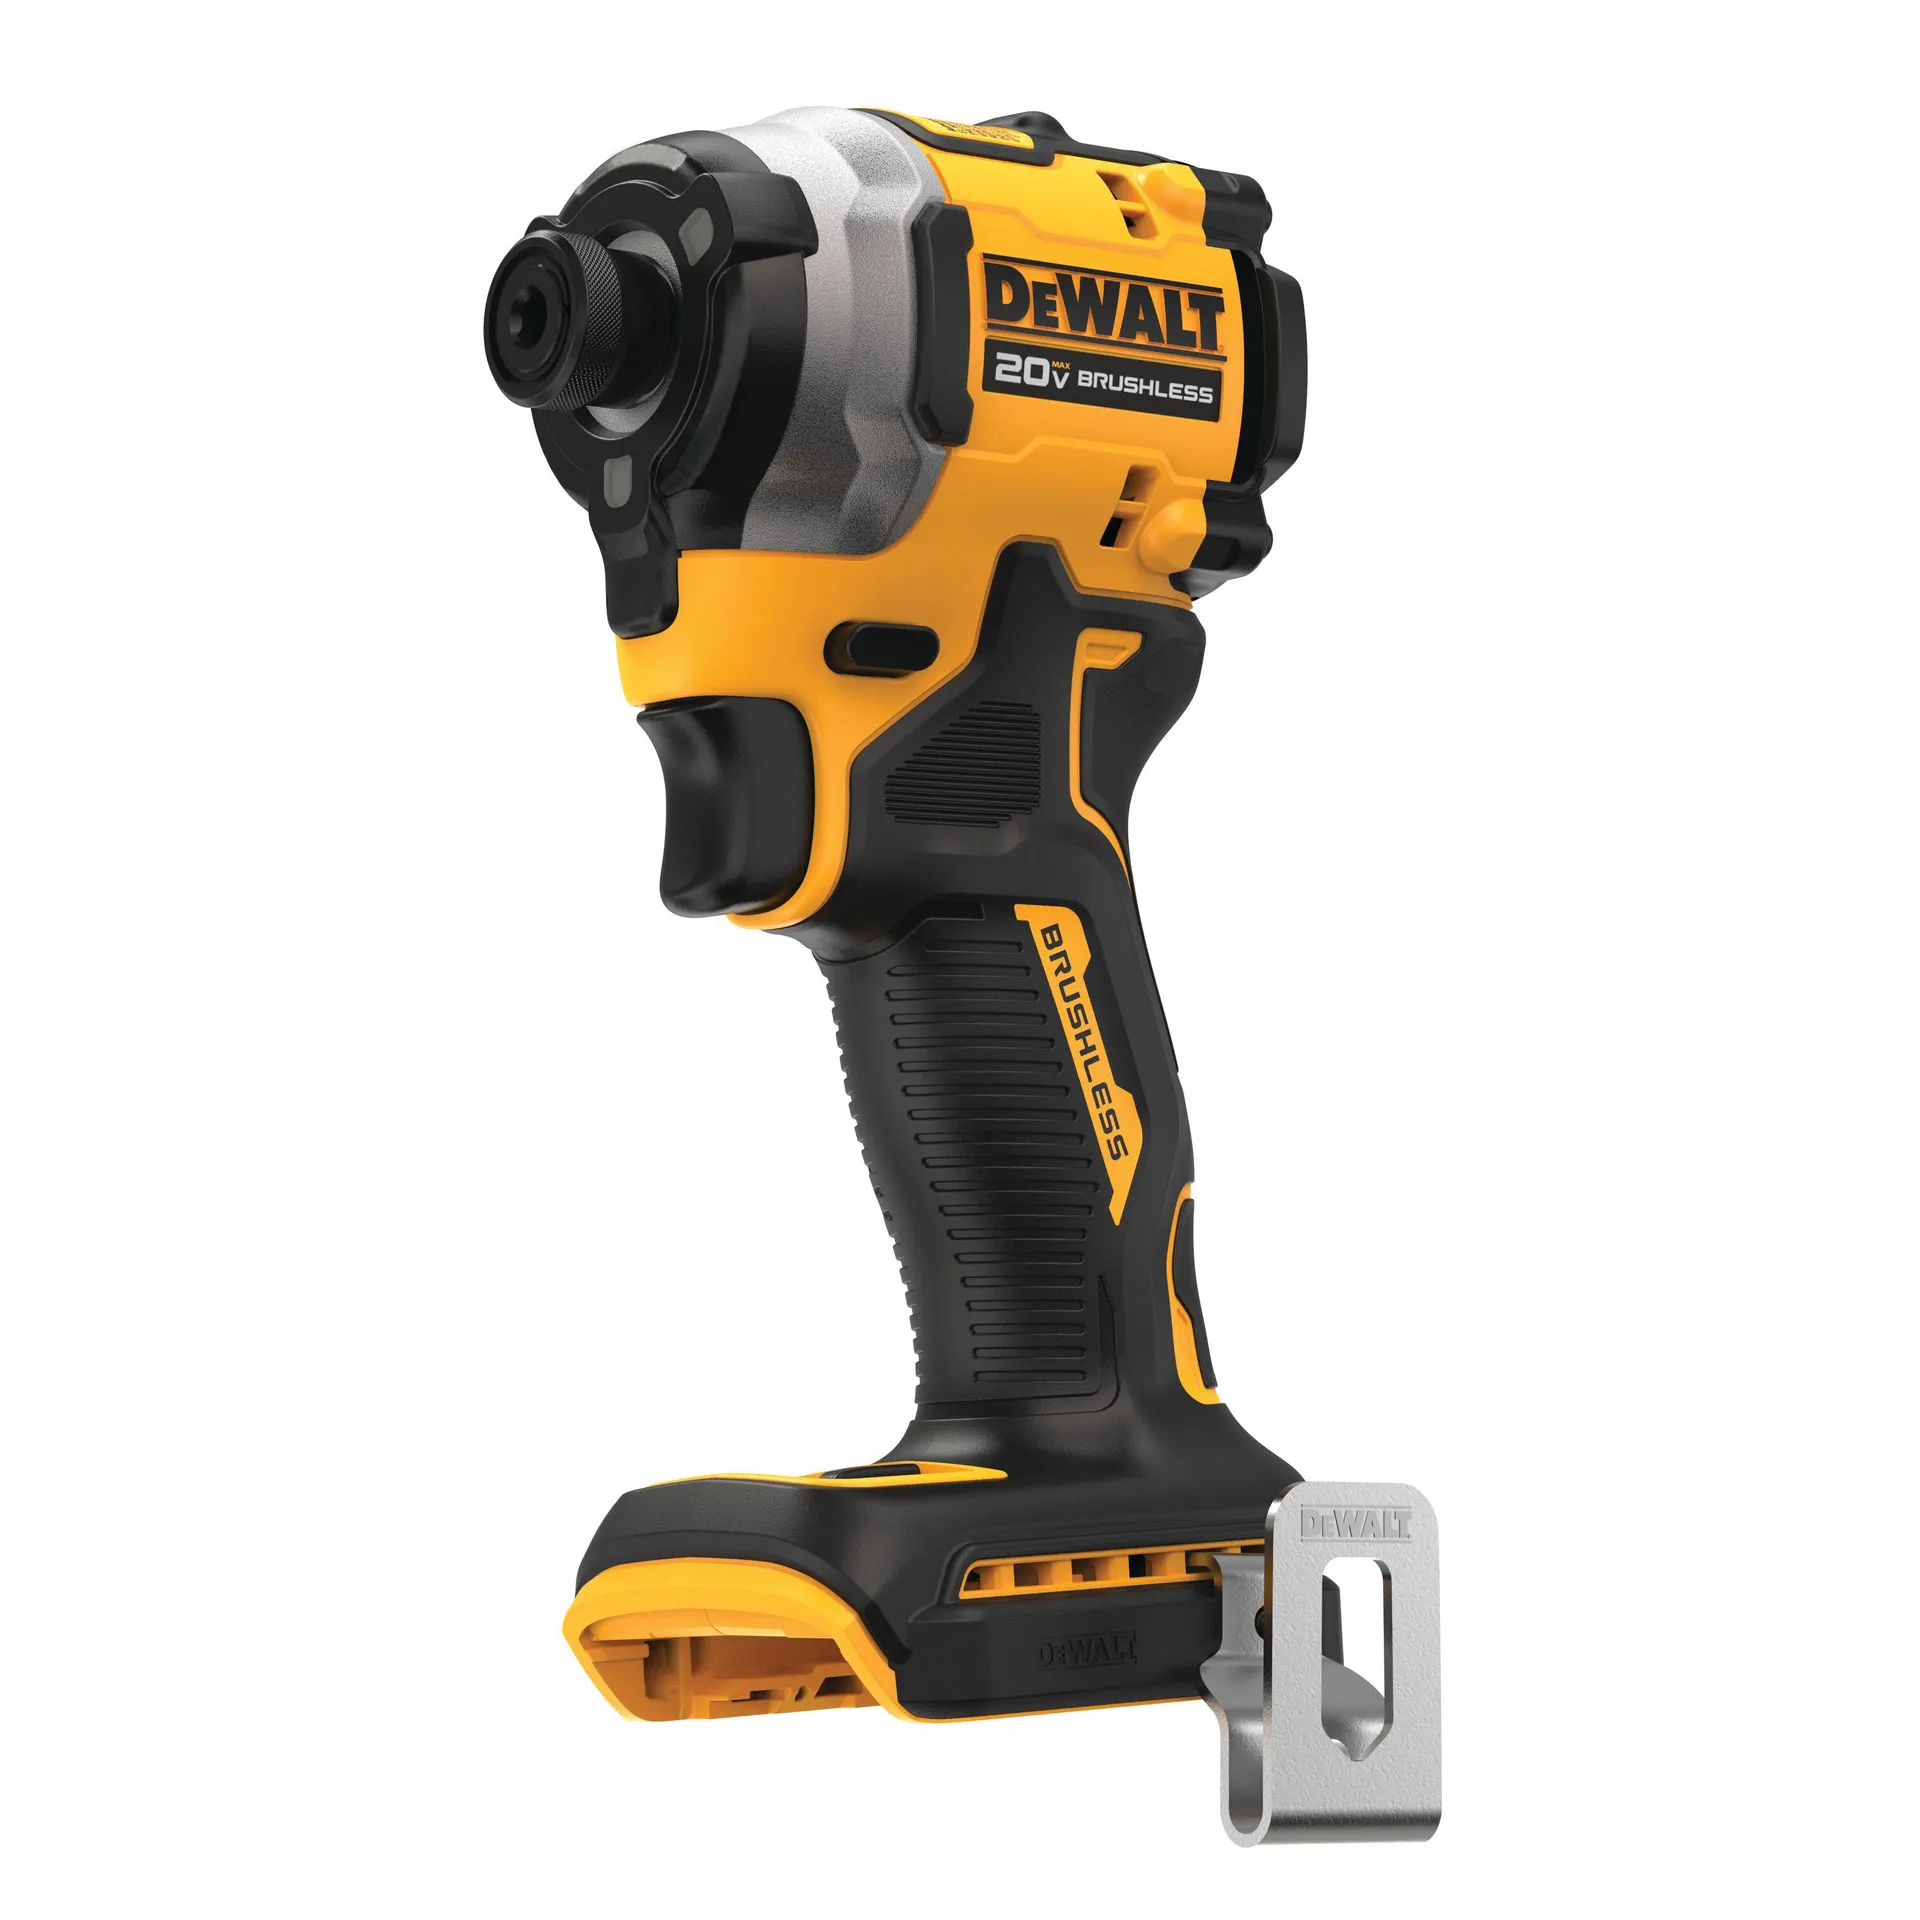 Atomic DCF850B Impact Driver, Tool Only, 20 V, 1/4 in Drive, Hex Drive, 3800 ipm, 3250 rpm Speed